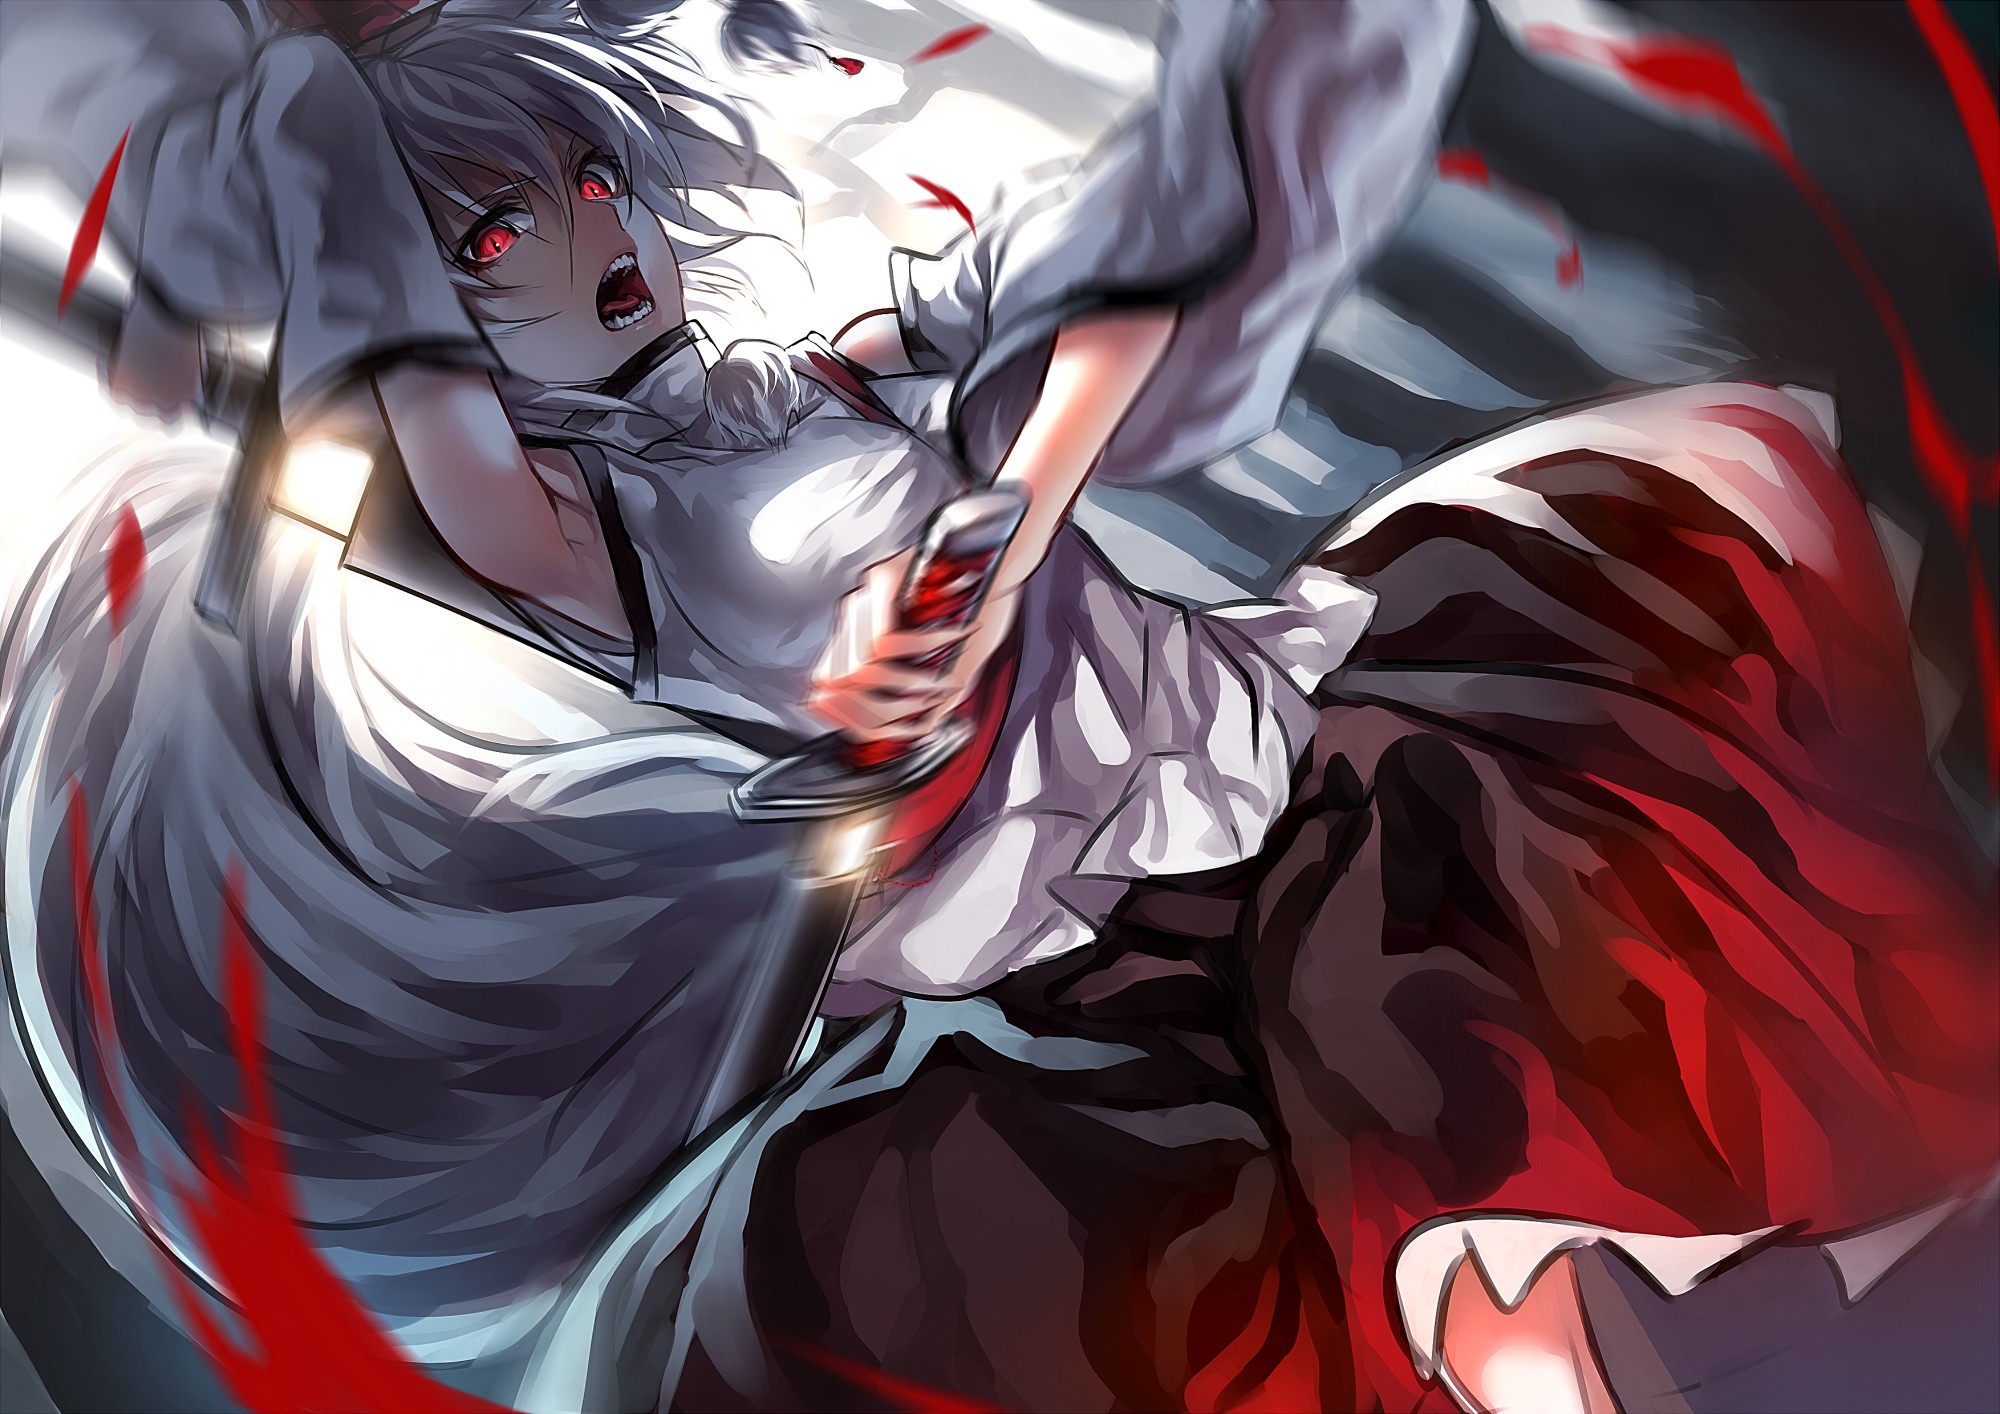 Fighter Anime Girls With White Hair - HD Wallpaper 